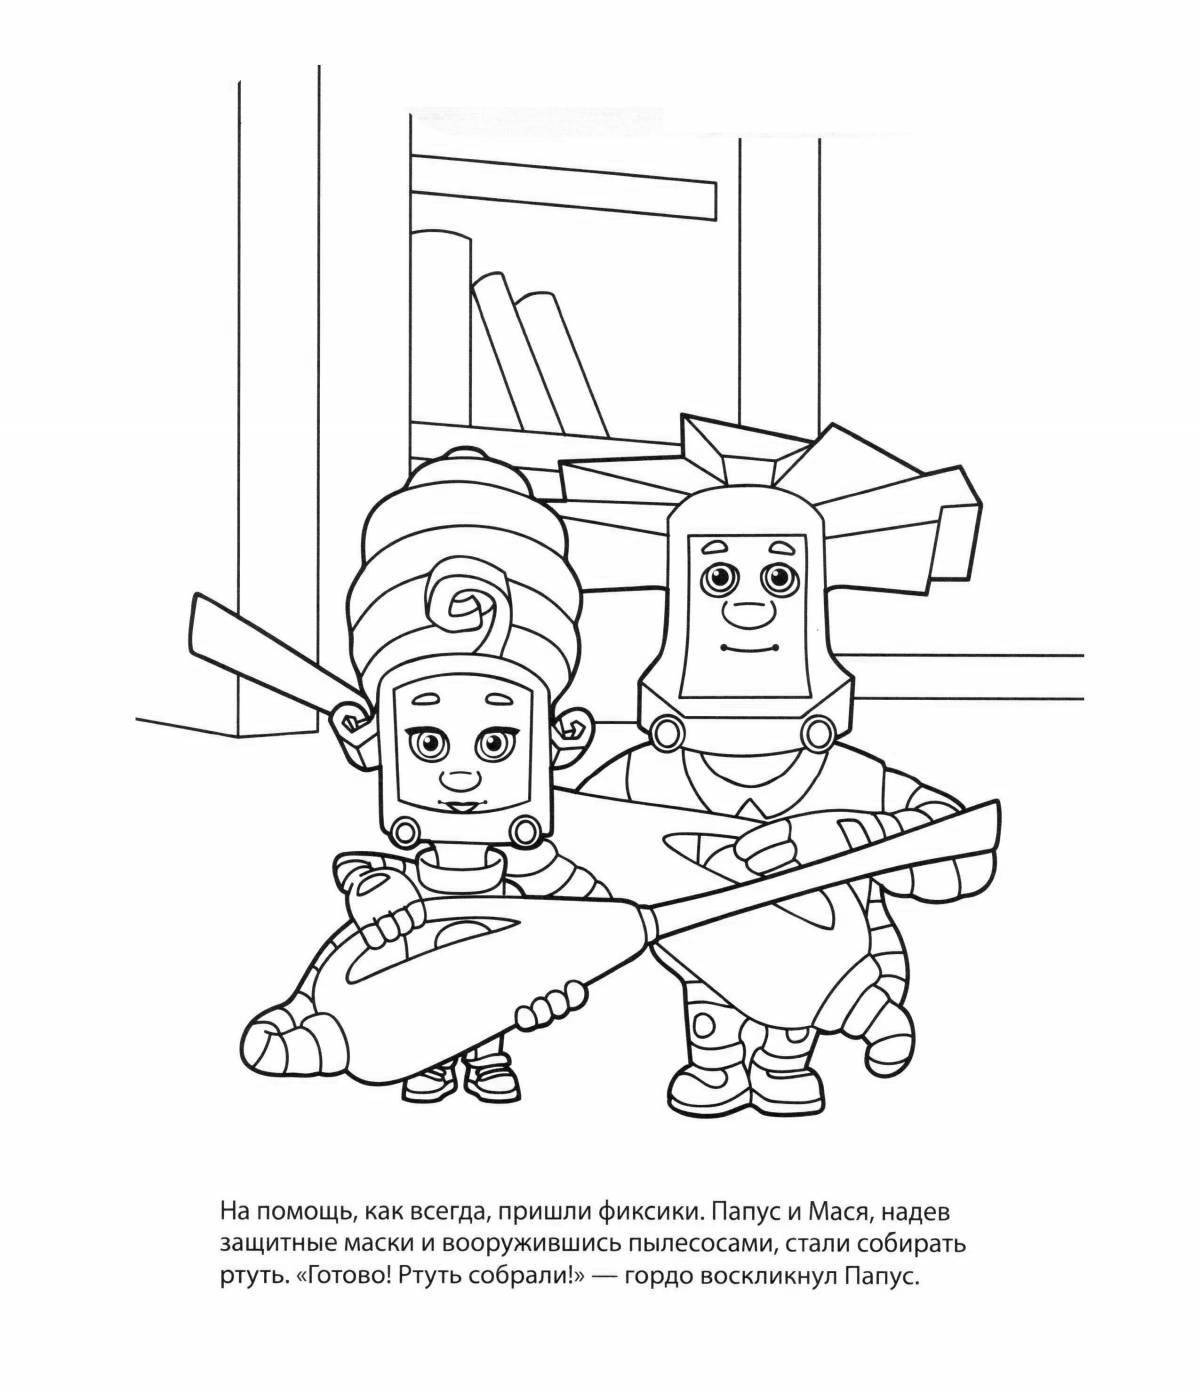 Coloring page adorable fixies robot